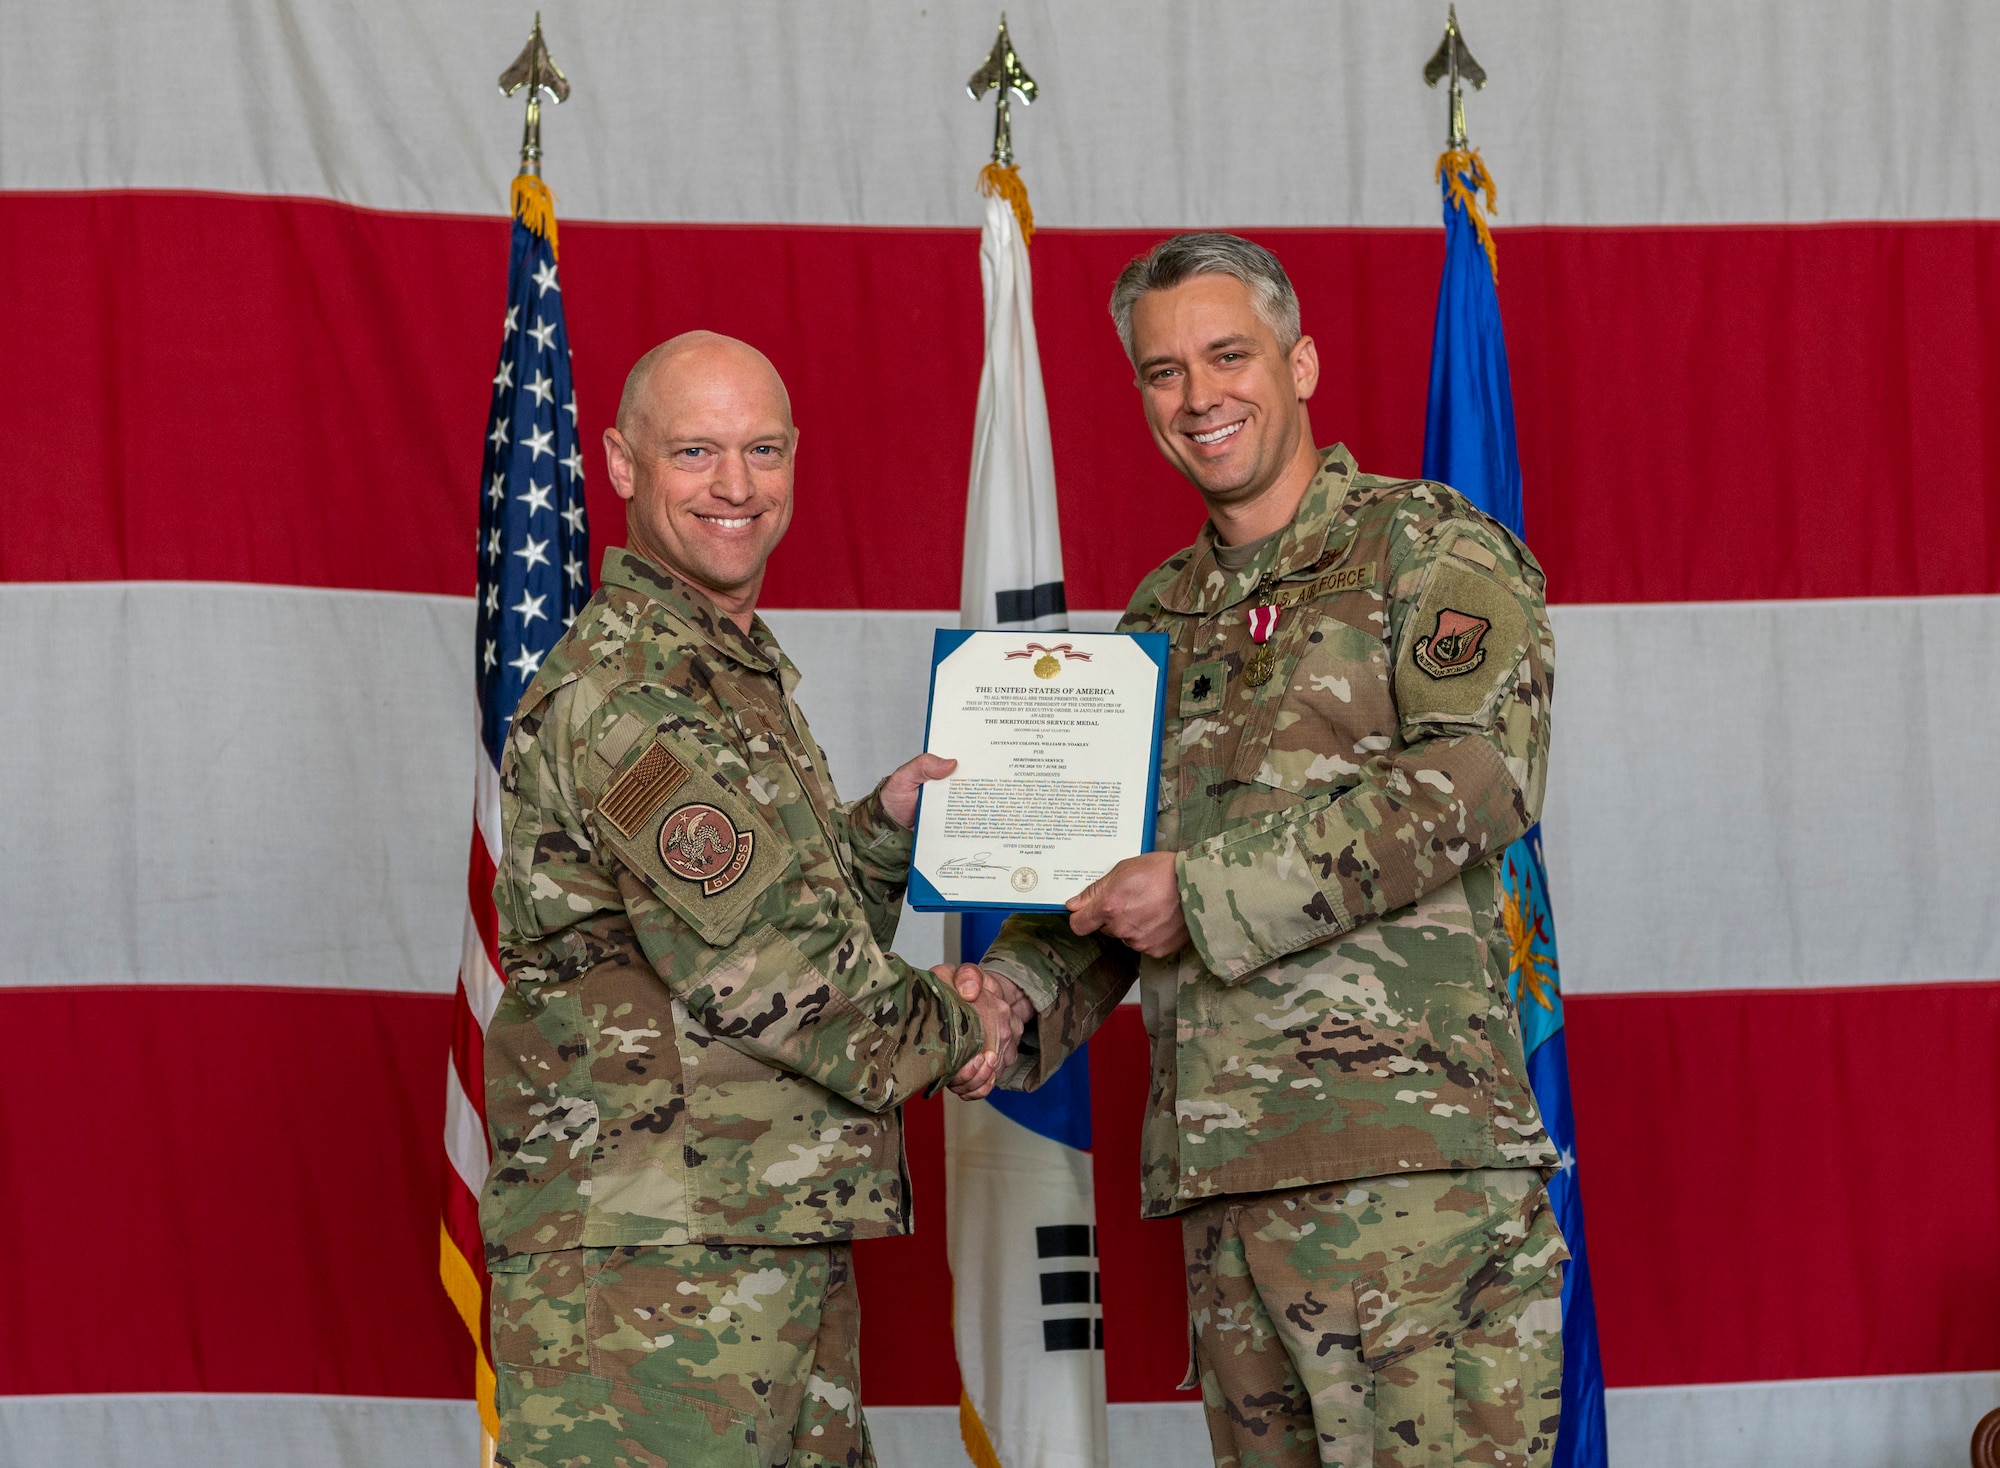 Col. Mathew Gaetke, 51st Operations Group commander, left, presents Lt. Col. William Yoakley, 51st Operations Support Squadron outgoing commander, a Meritorious Service Medal at Osan Air Base, Republic of Korea, June 7, 2022.